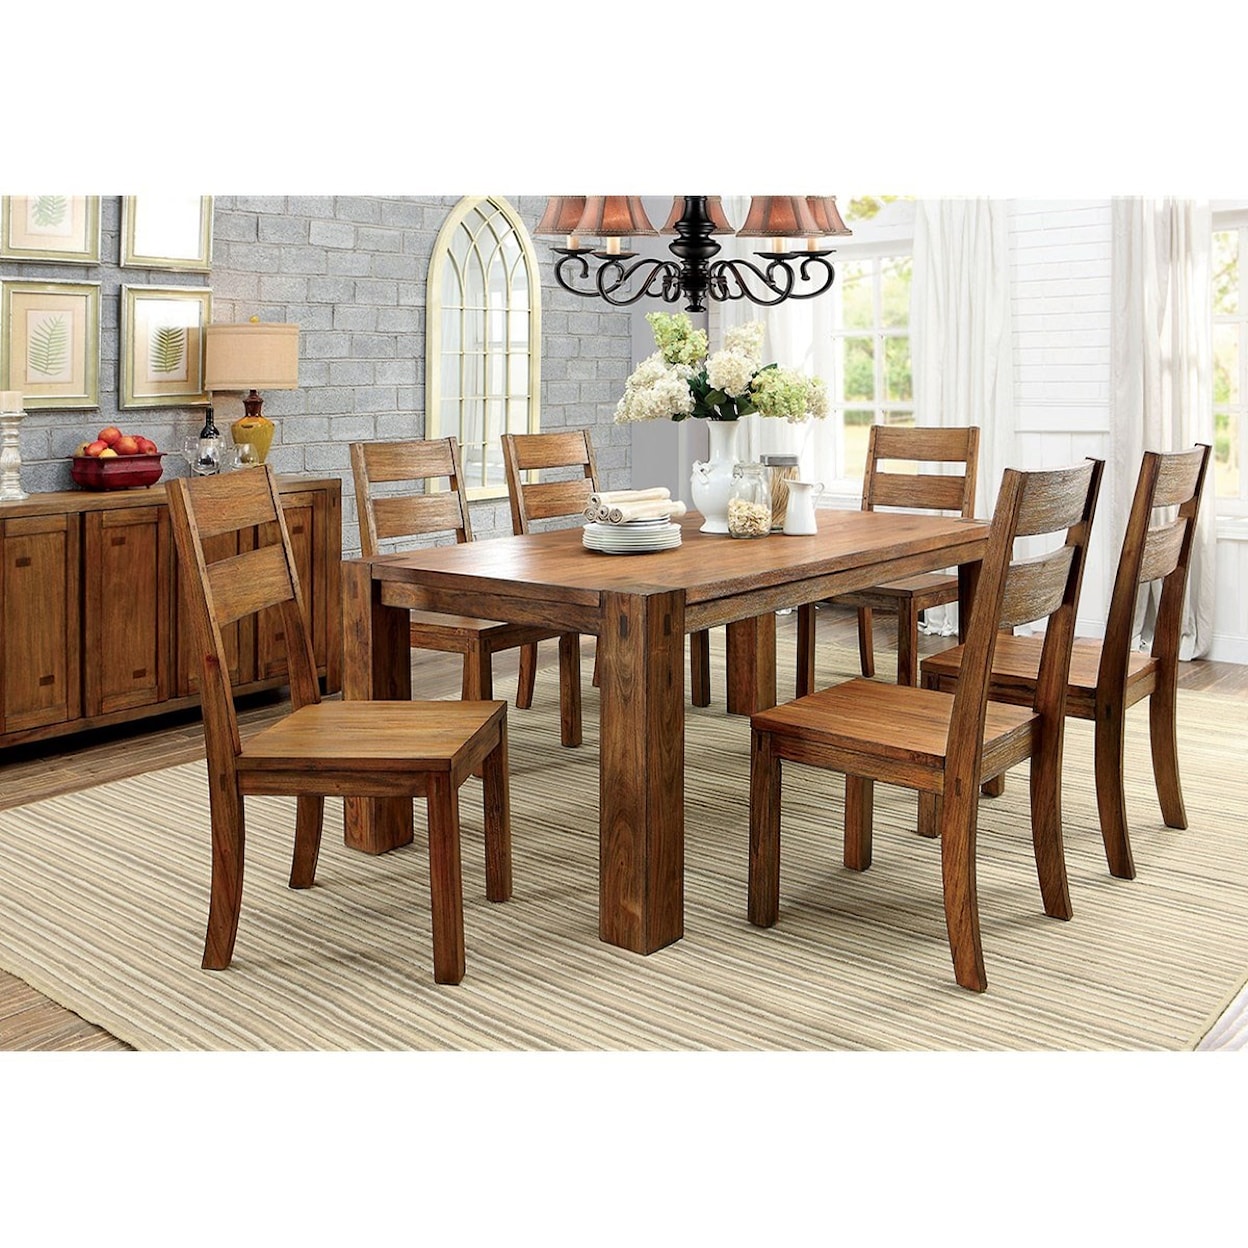 FUSA Frontier Table + 6 Side Chairs